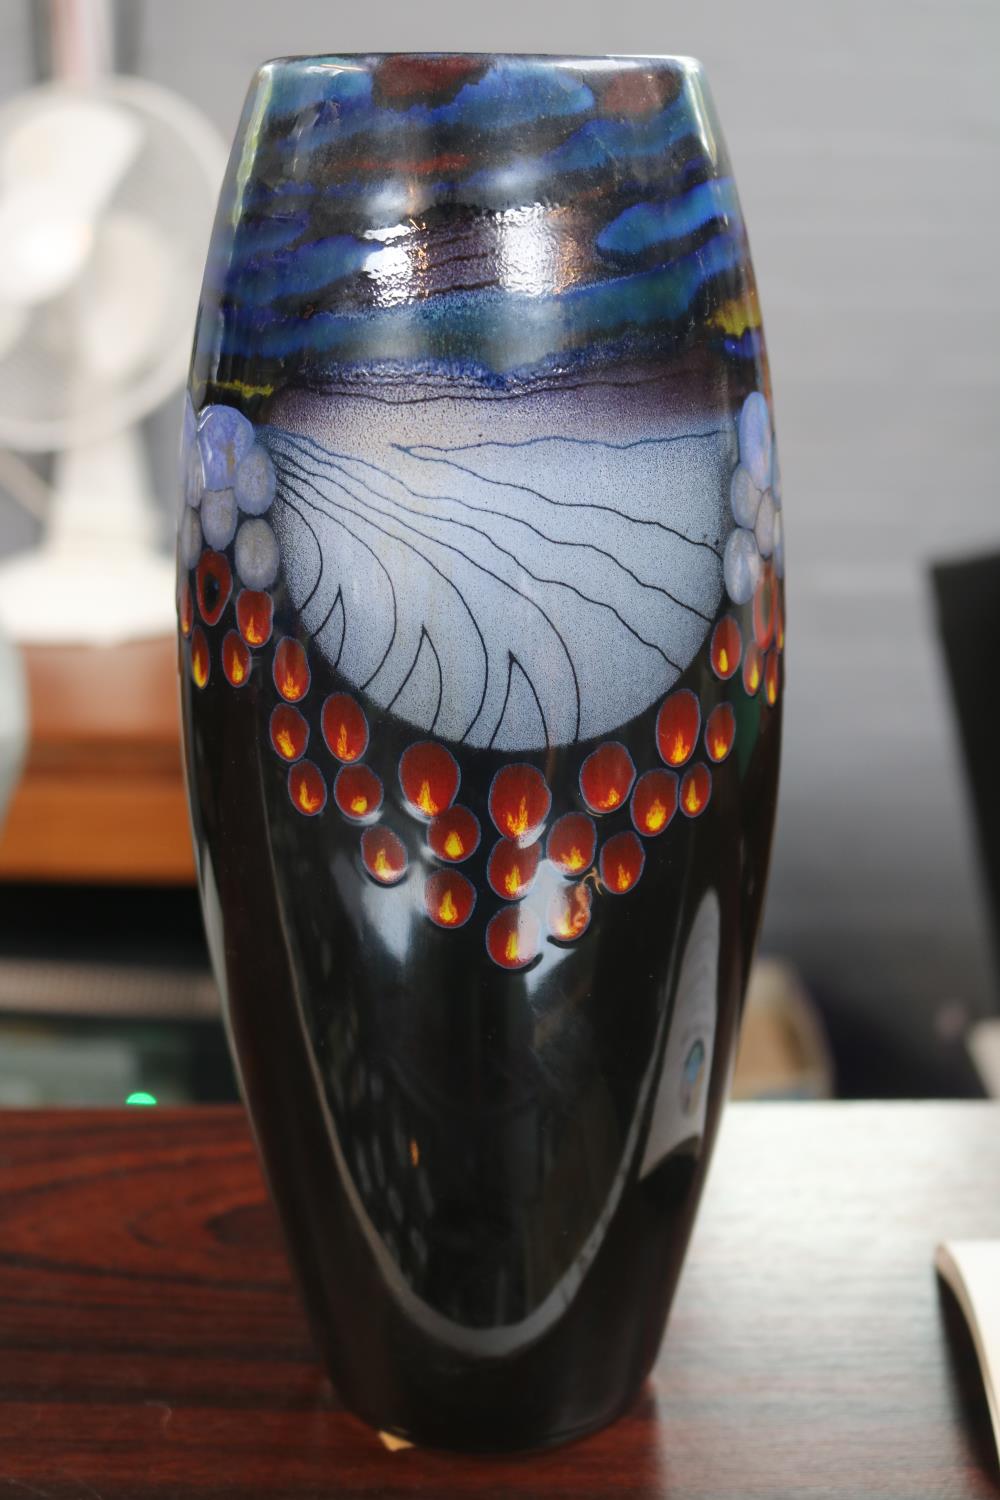 Alan Clarke Studio Pottery Artic Moon design vase limited edition 44 of 200 signed to base 28cm in